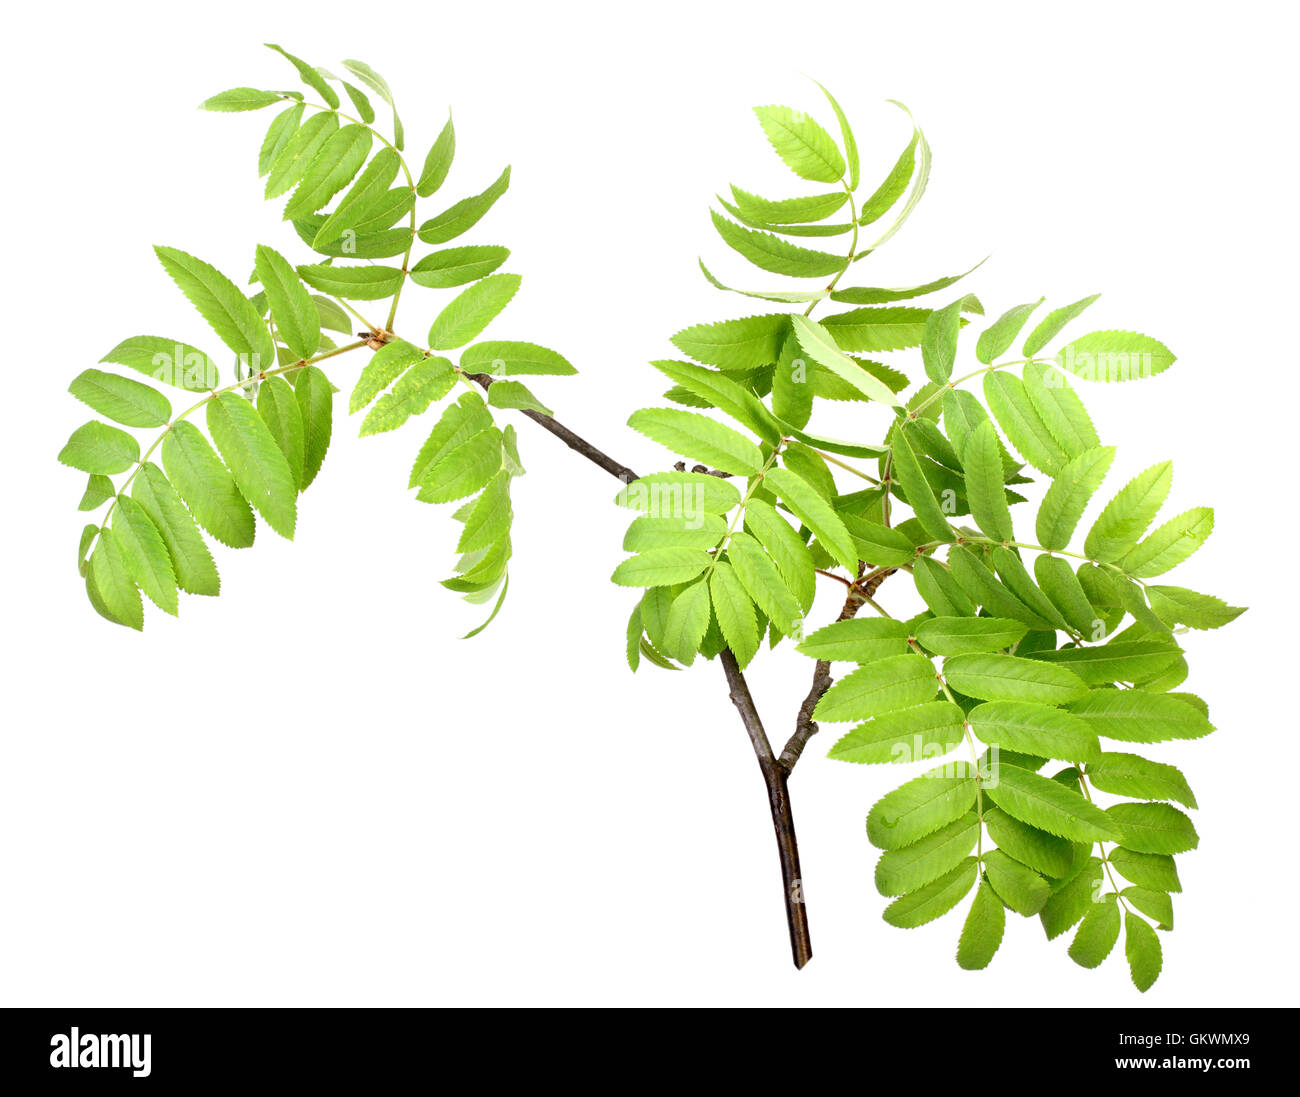 Rowan leaf Cut Out Stock Images & Pictures - Alamy